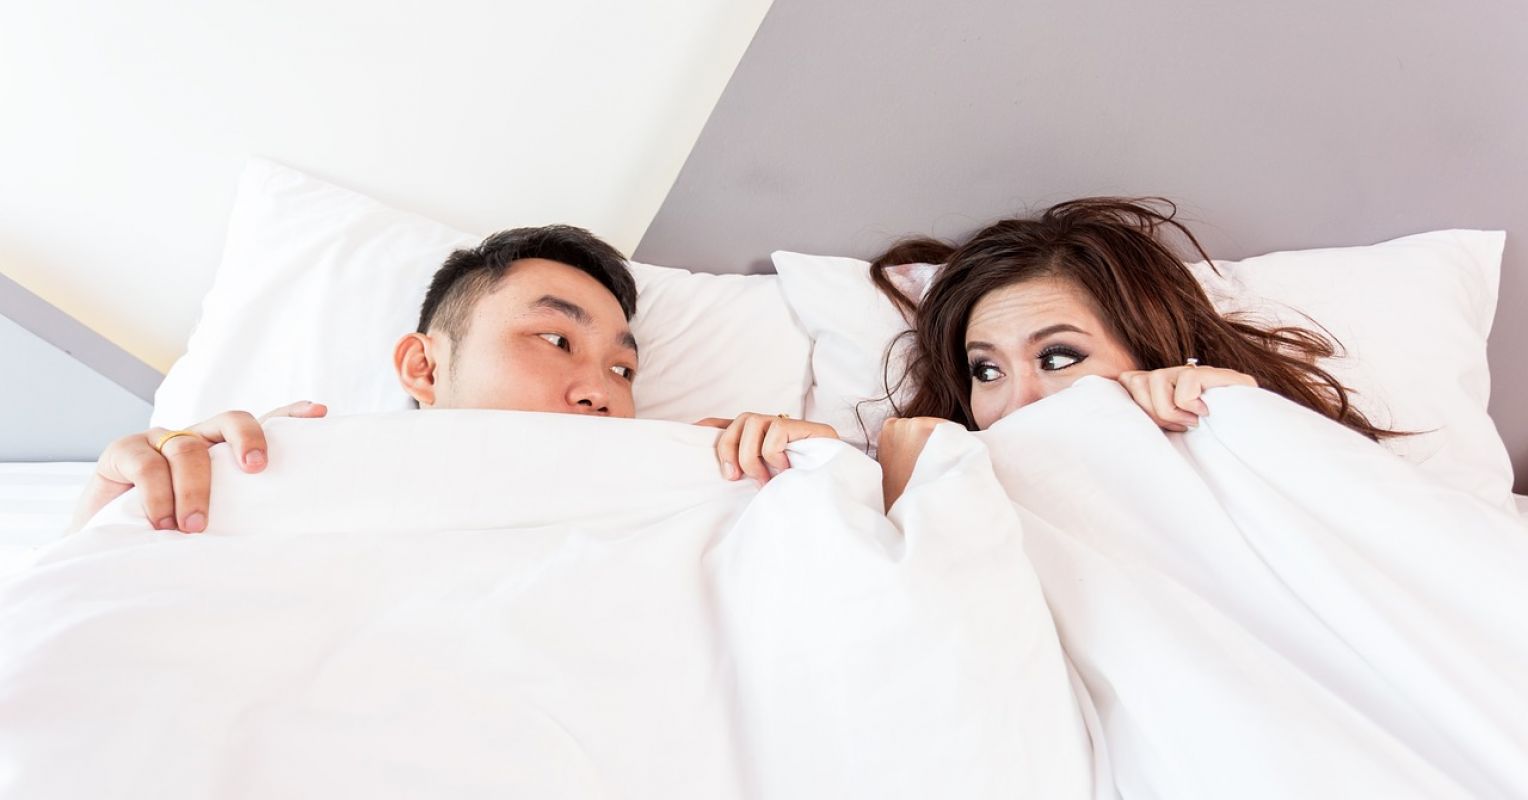 If You Want Better Sex, Tell Your Partner What You Want Psychology Today pic